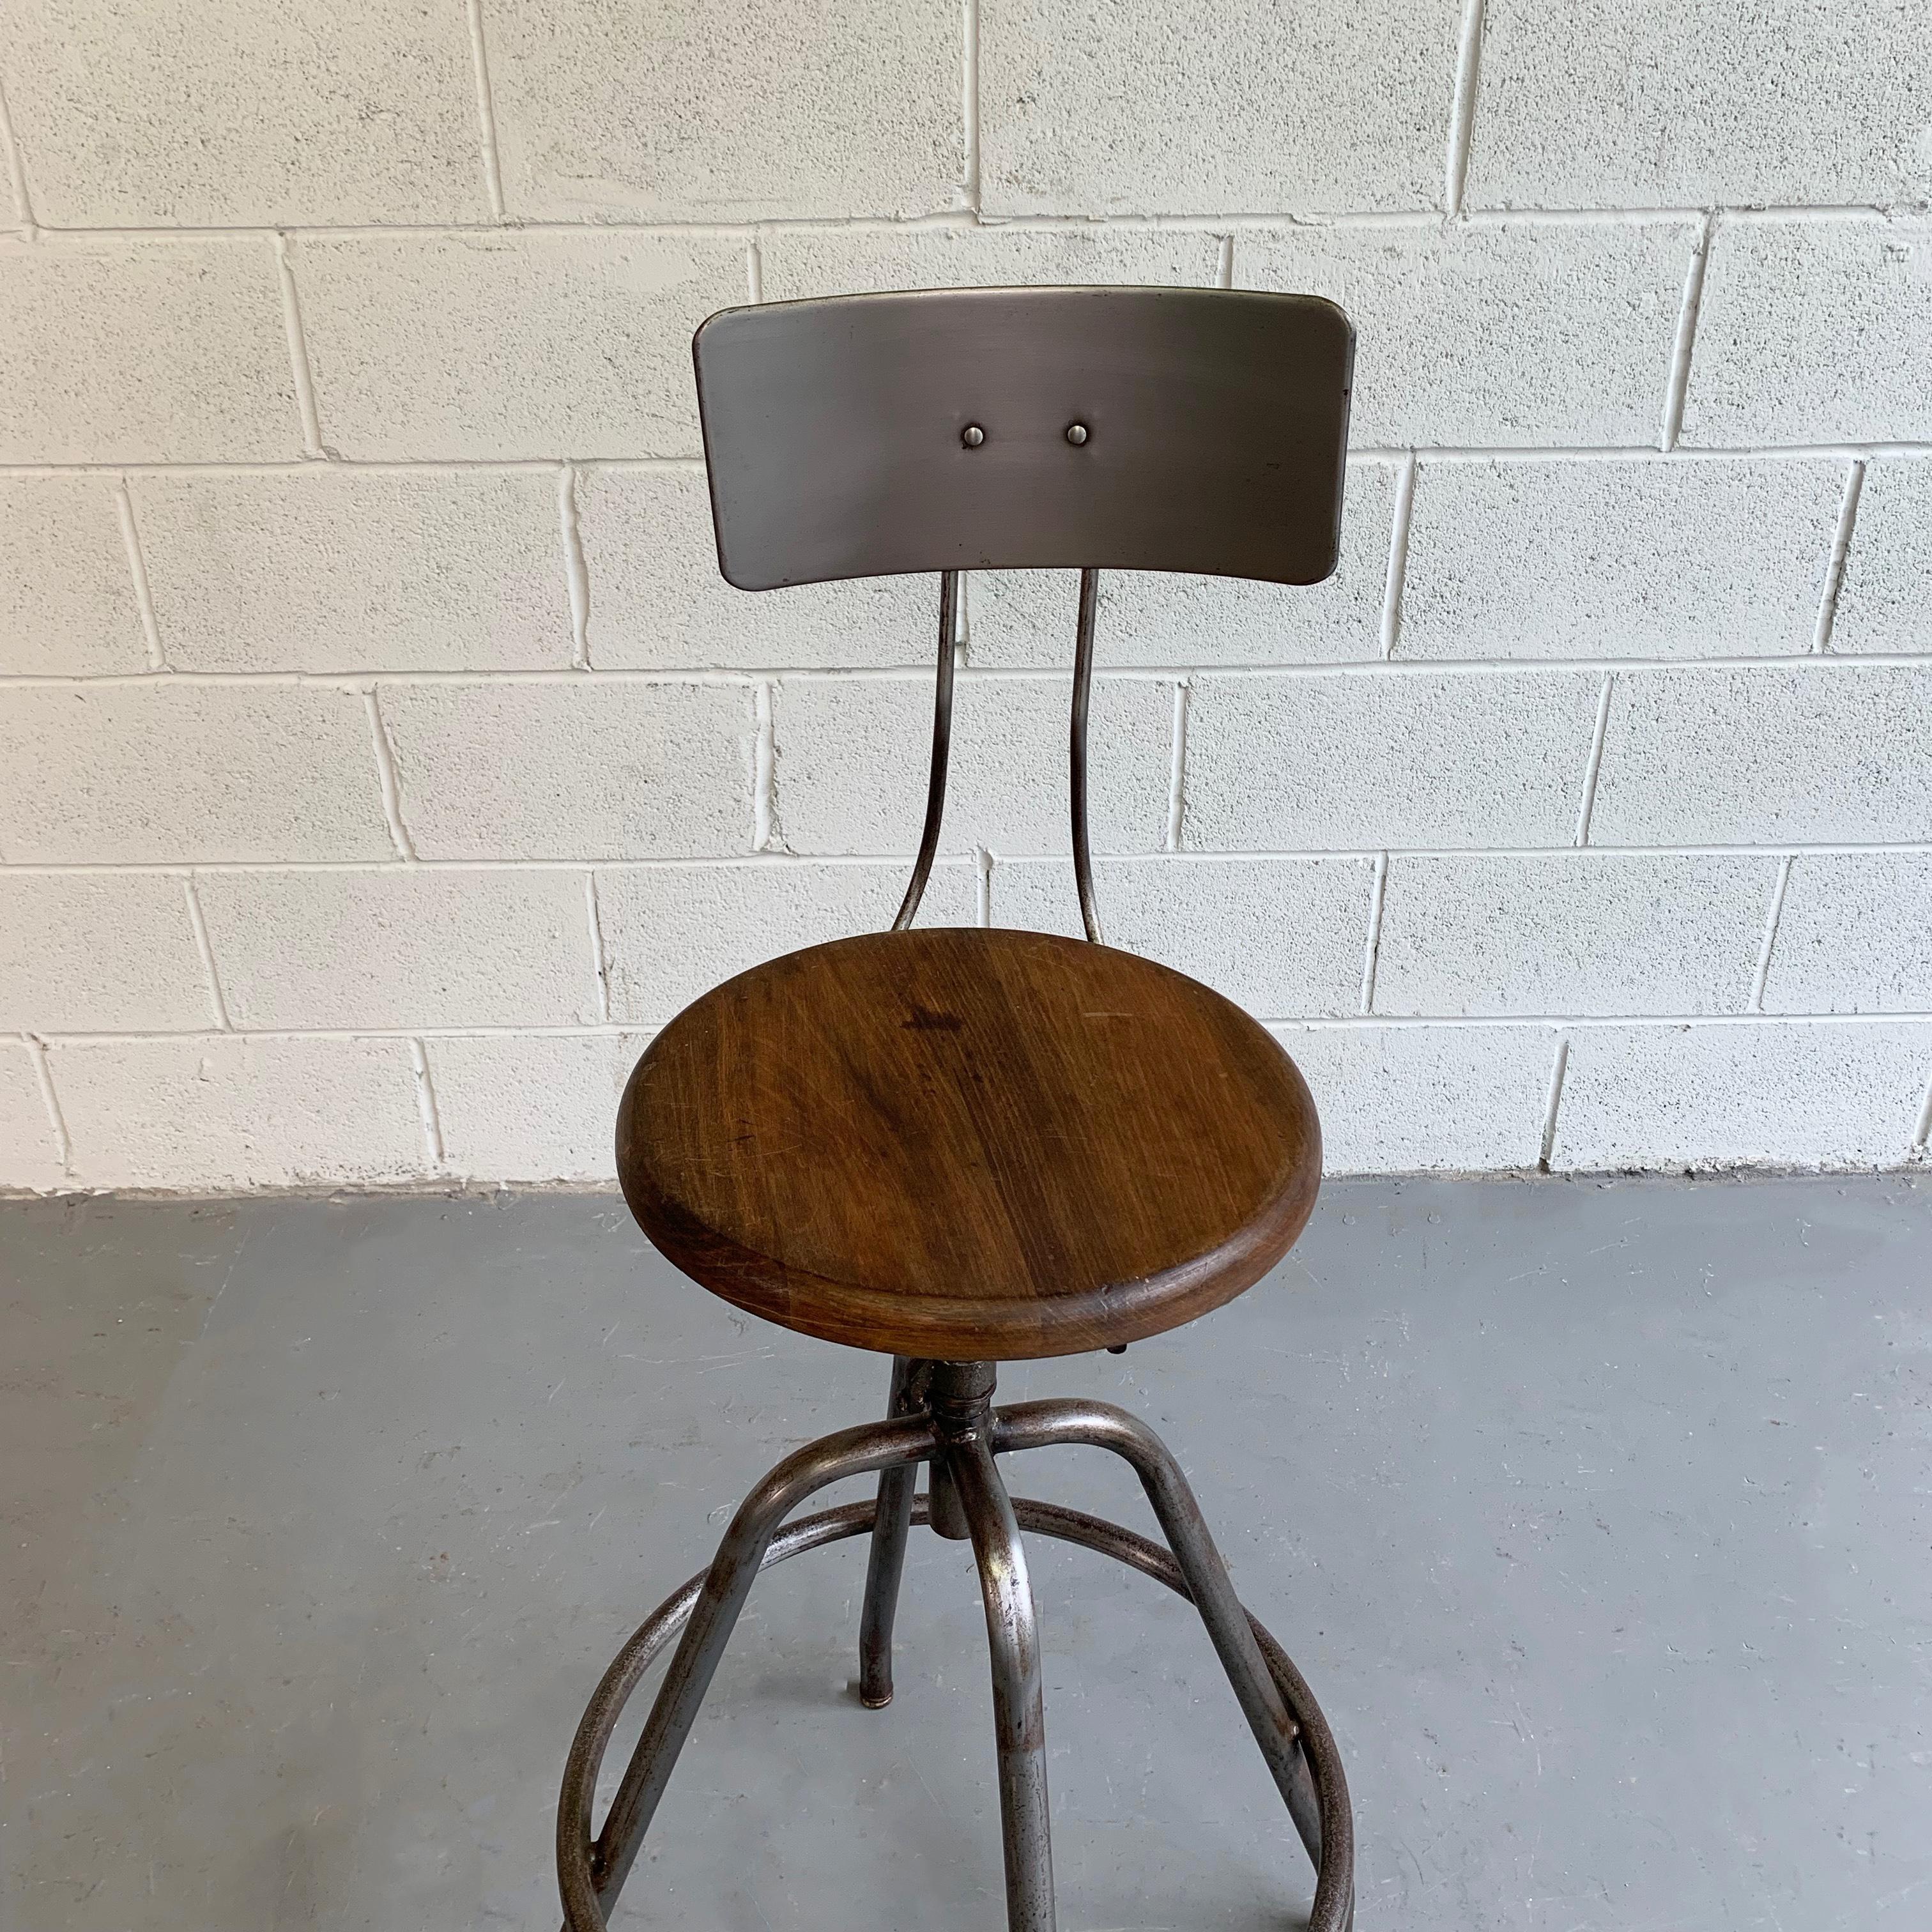 Industrial Adjustable Brushed Steel Drafting Stool In Good Condition For Sale In Brooklyn, NY